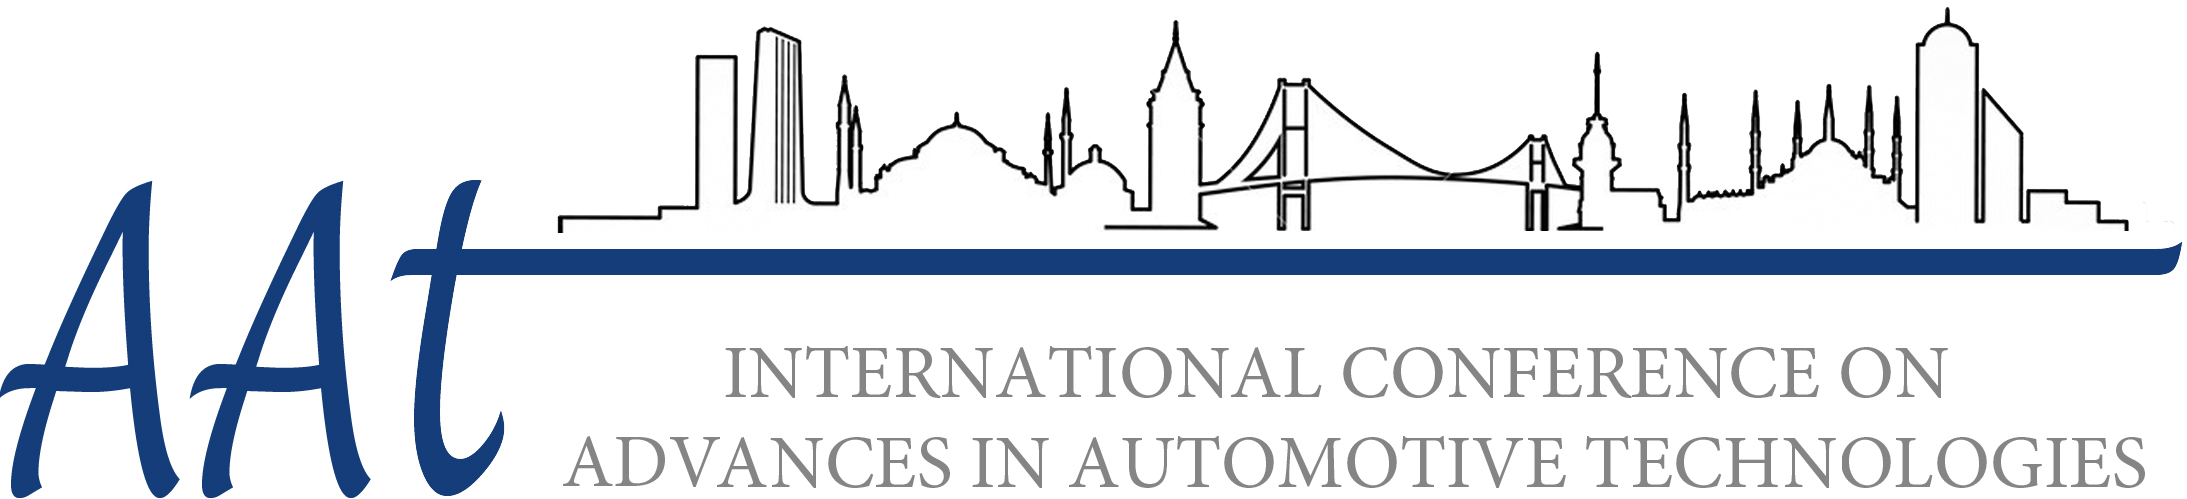 International Conference On Advances In Automotive Technologies 2016 will be performed on Automotive Technologies (Vehicle, Motor, Internal Combustion Engine) and Tribology.

Selected manuscripts will be considered for publication in special issues of two SCI Journals. Strojniški vestnik-Journal of Mechanical Engineering (imp.fact. 0.821)/SCI-Expanded and an International Tribology Journal/SCI-Expanded (imp.fact.0.260).